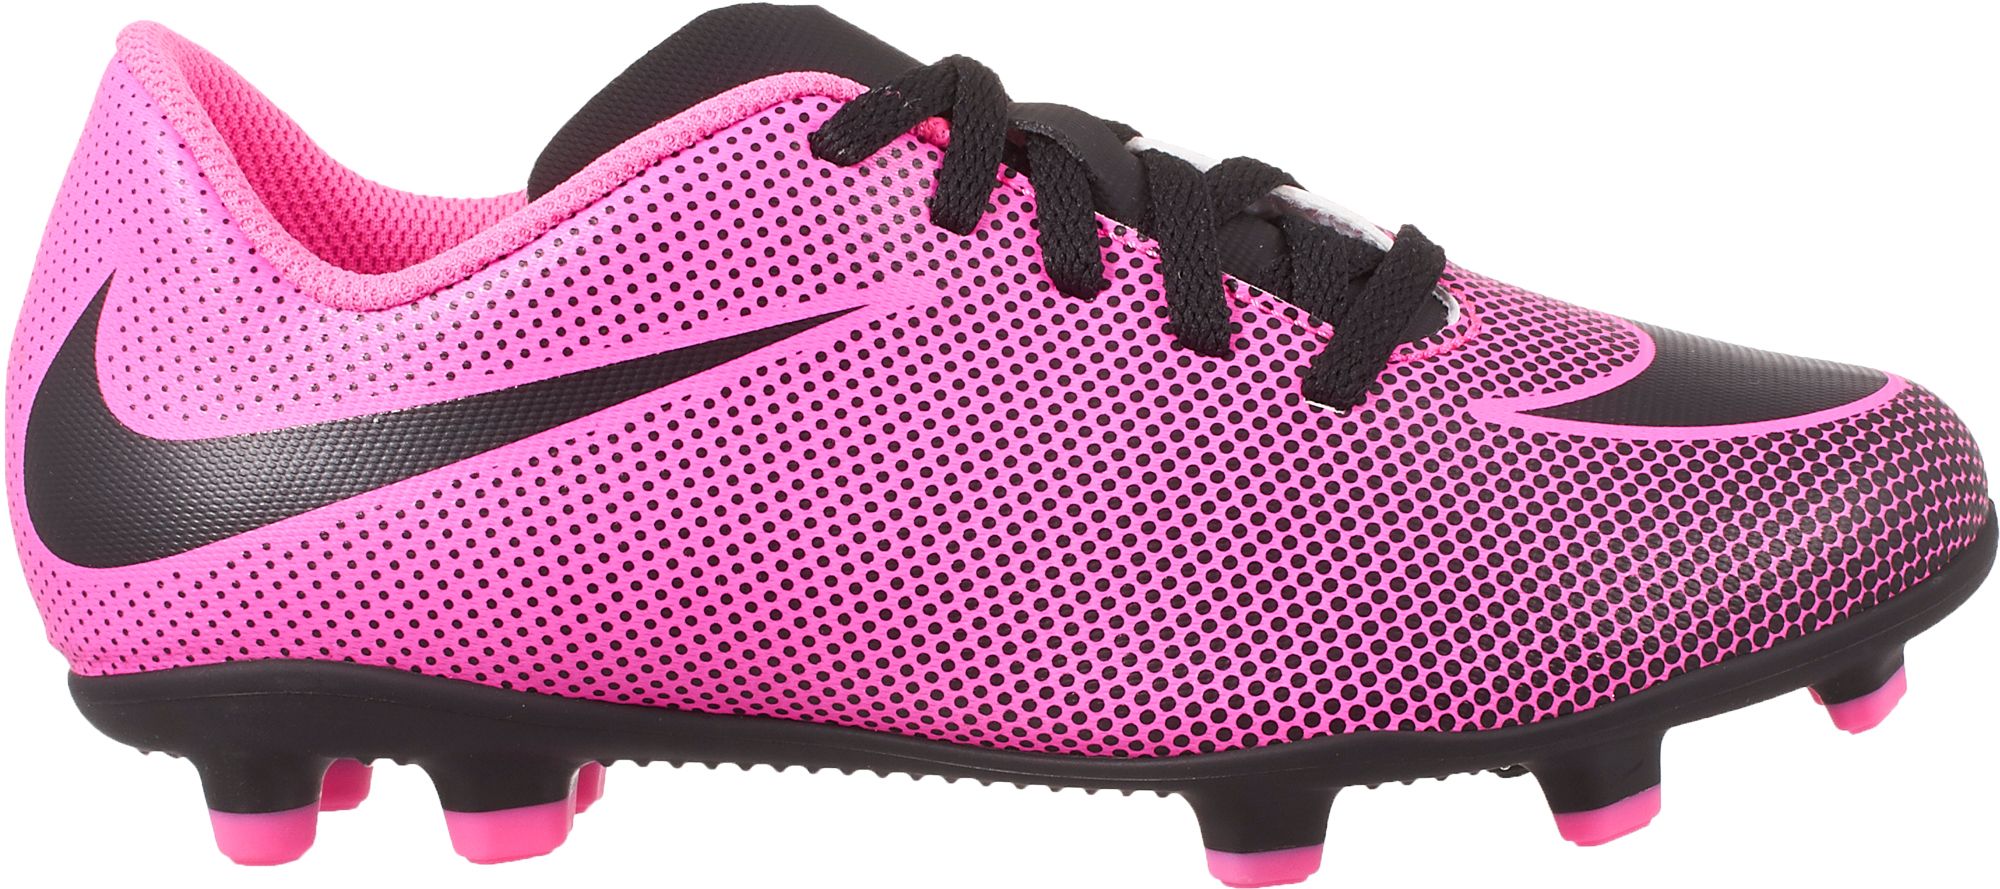 adidas girls soccer shoes